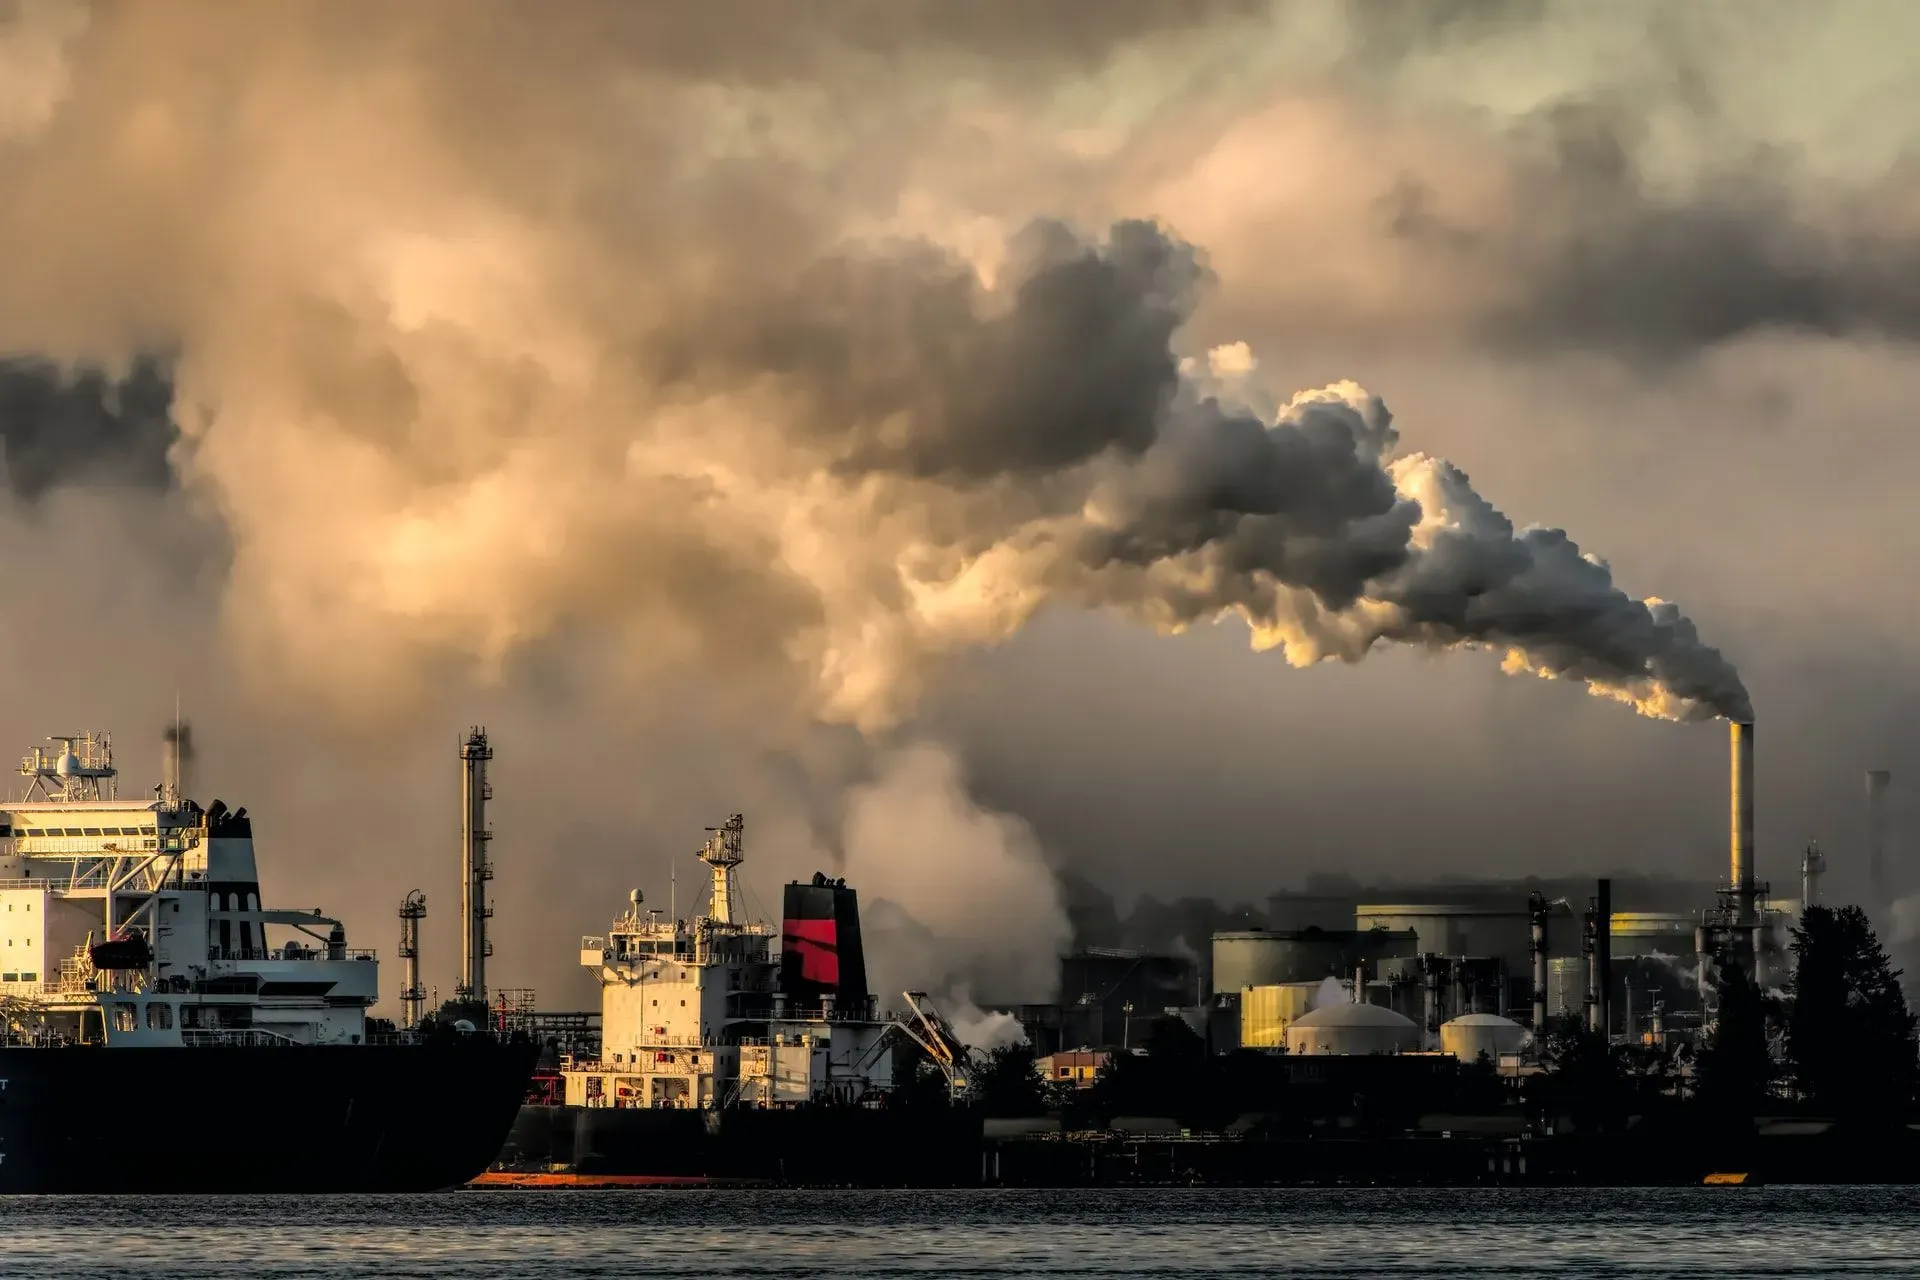 Coal pollution facts are extremely important to understand climate change. Read them all here at Kidadl.